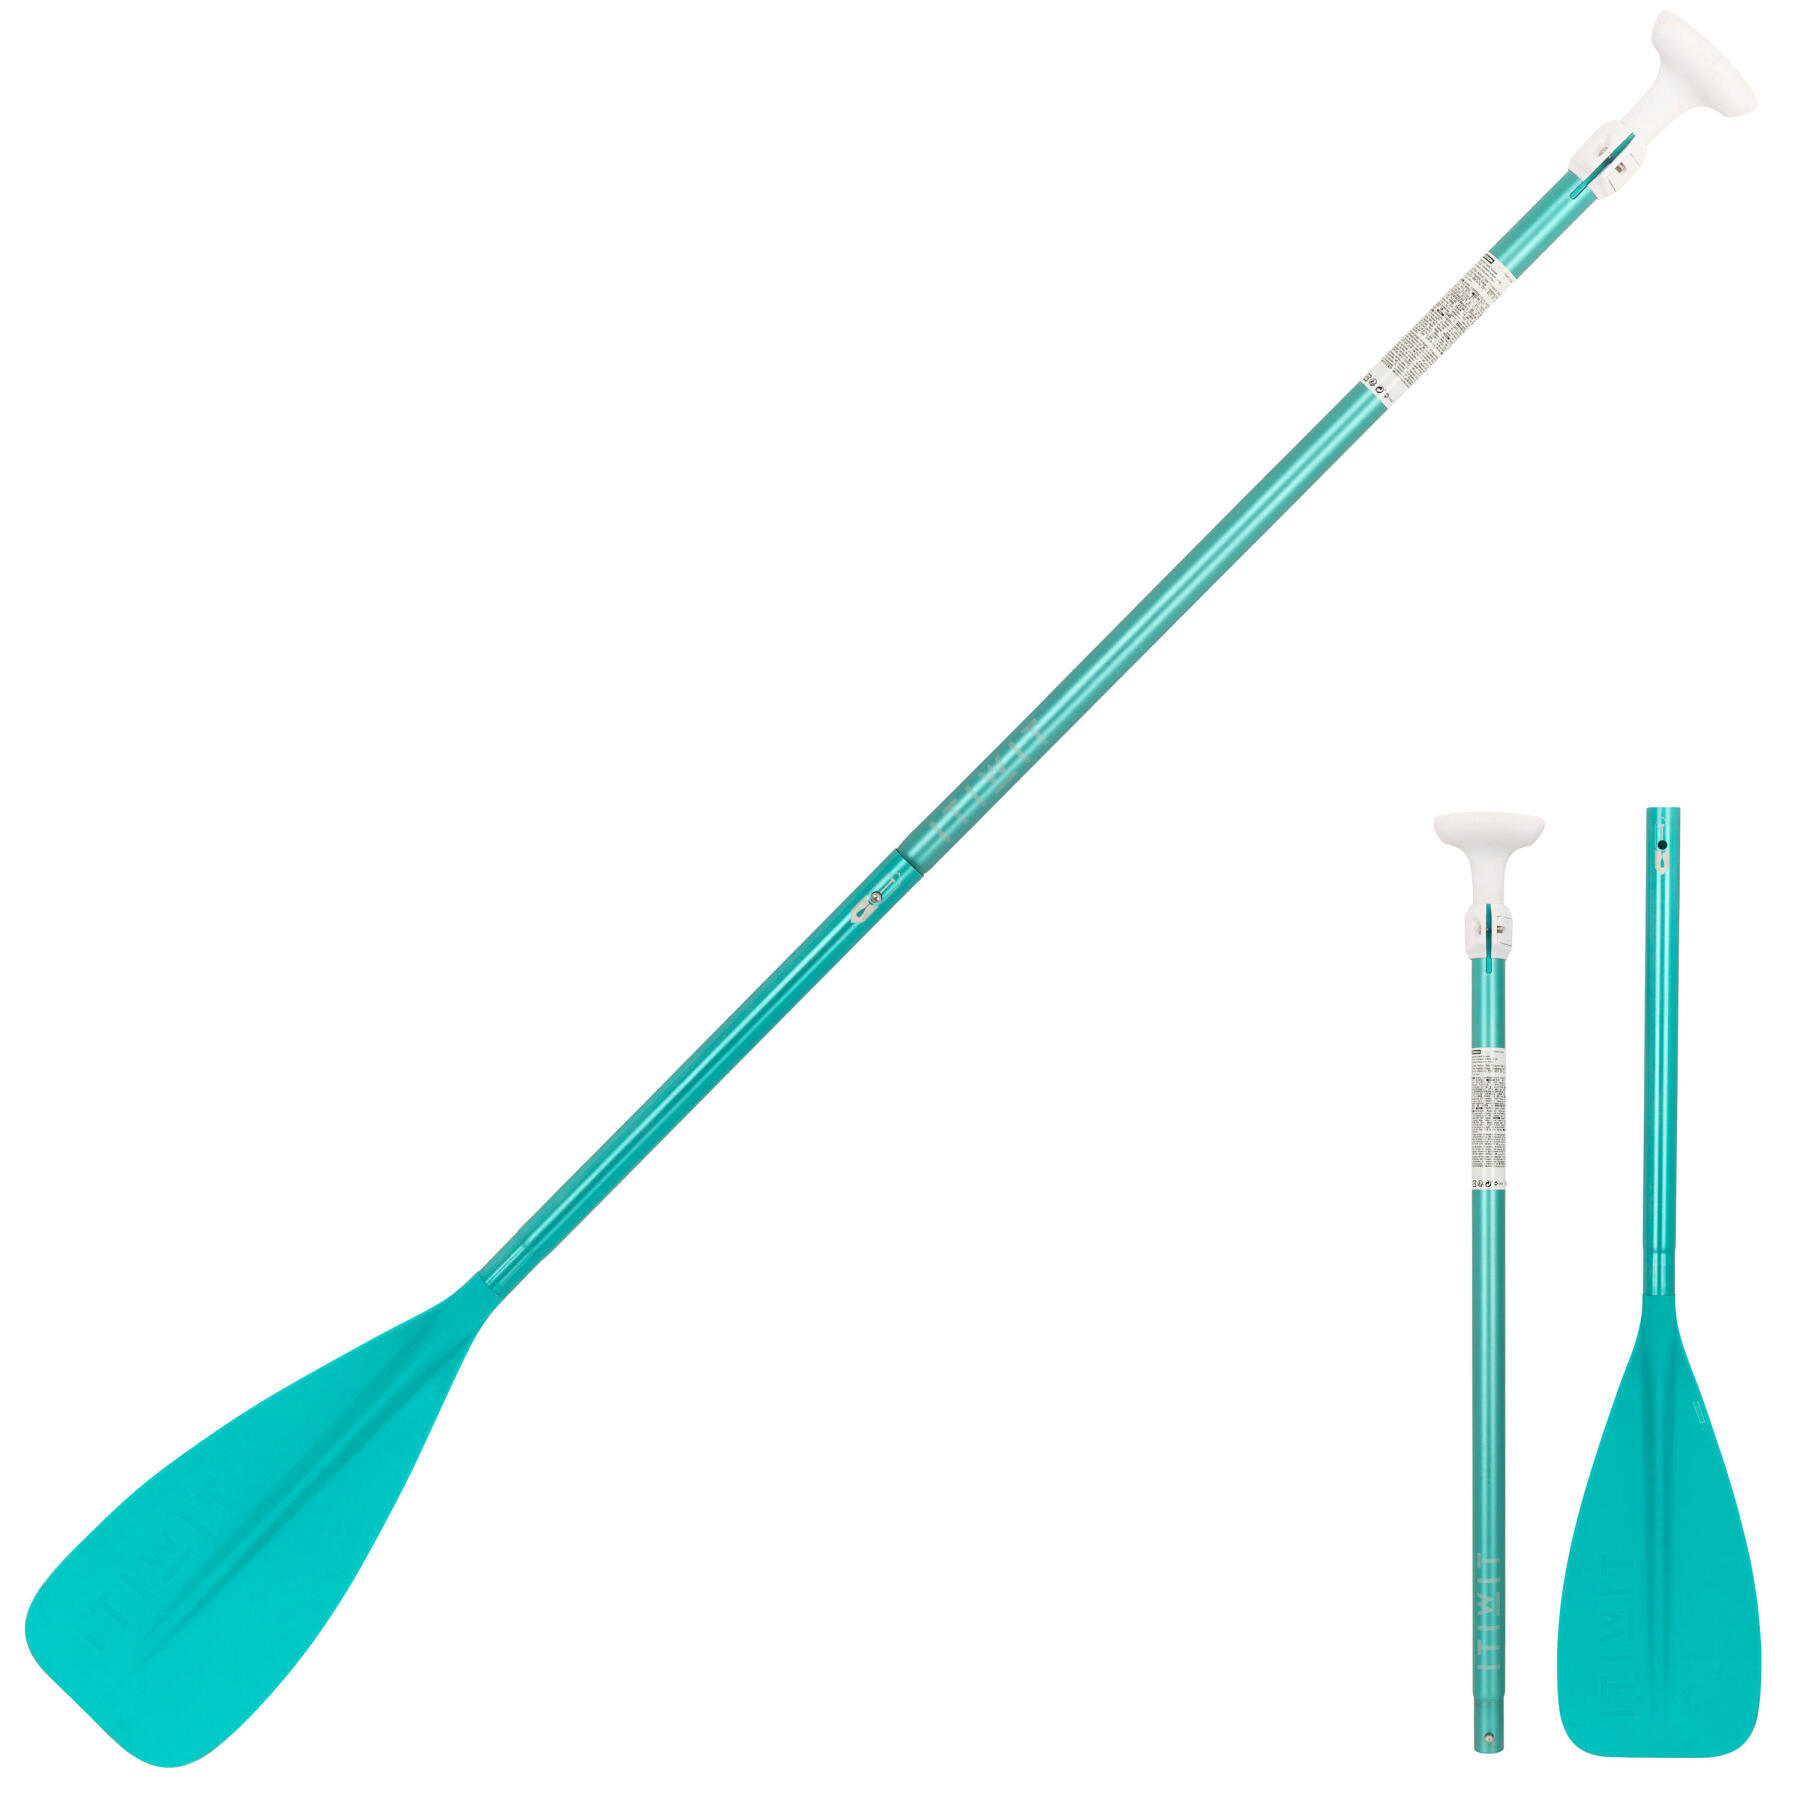 paddle-sup-collapsible-green-itiwit 